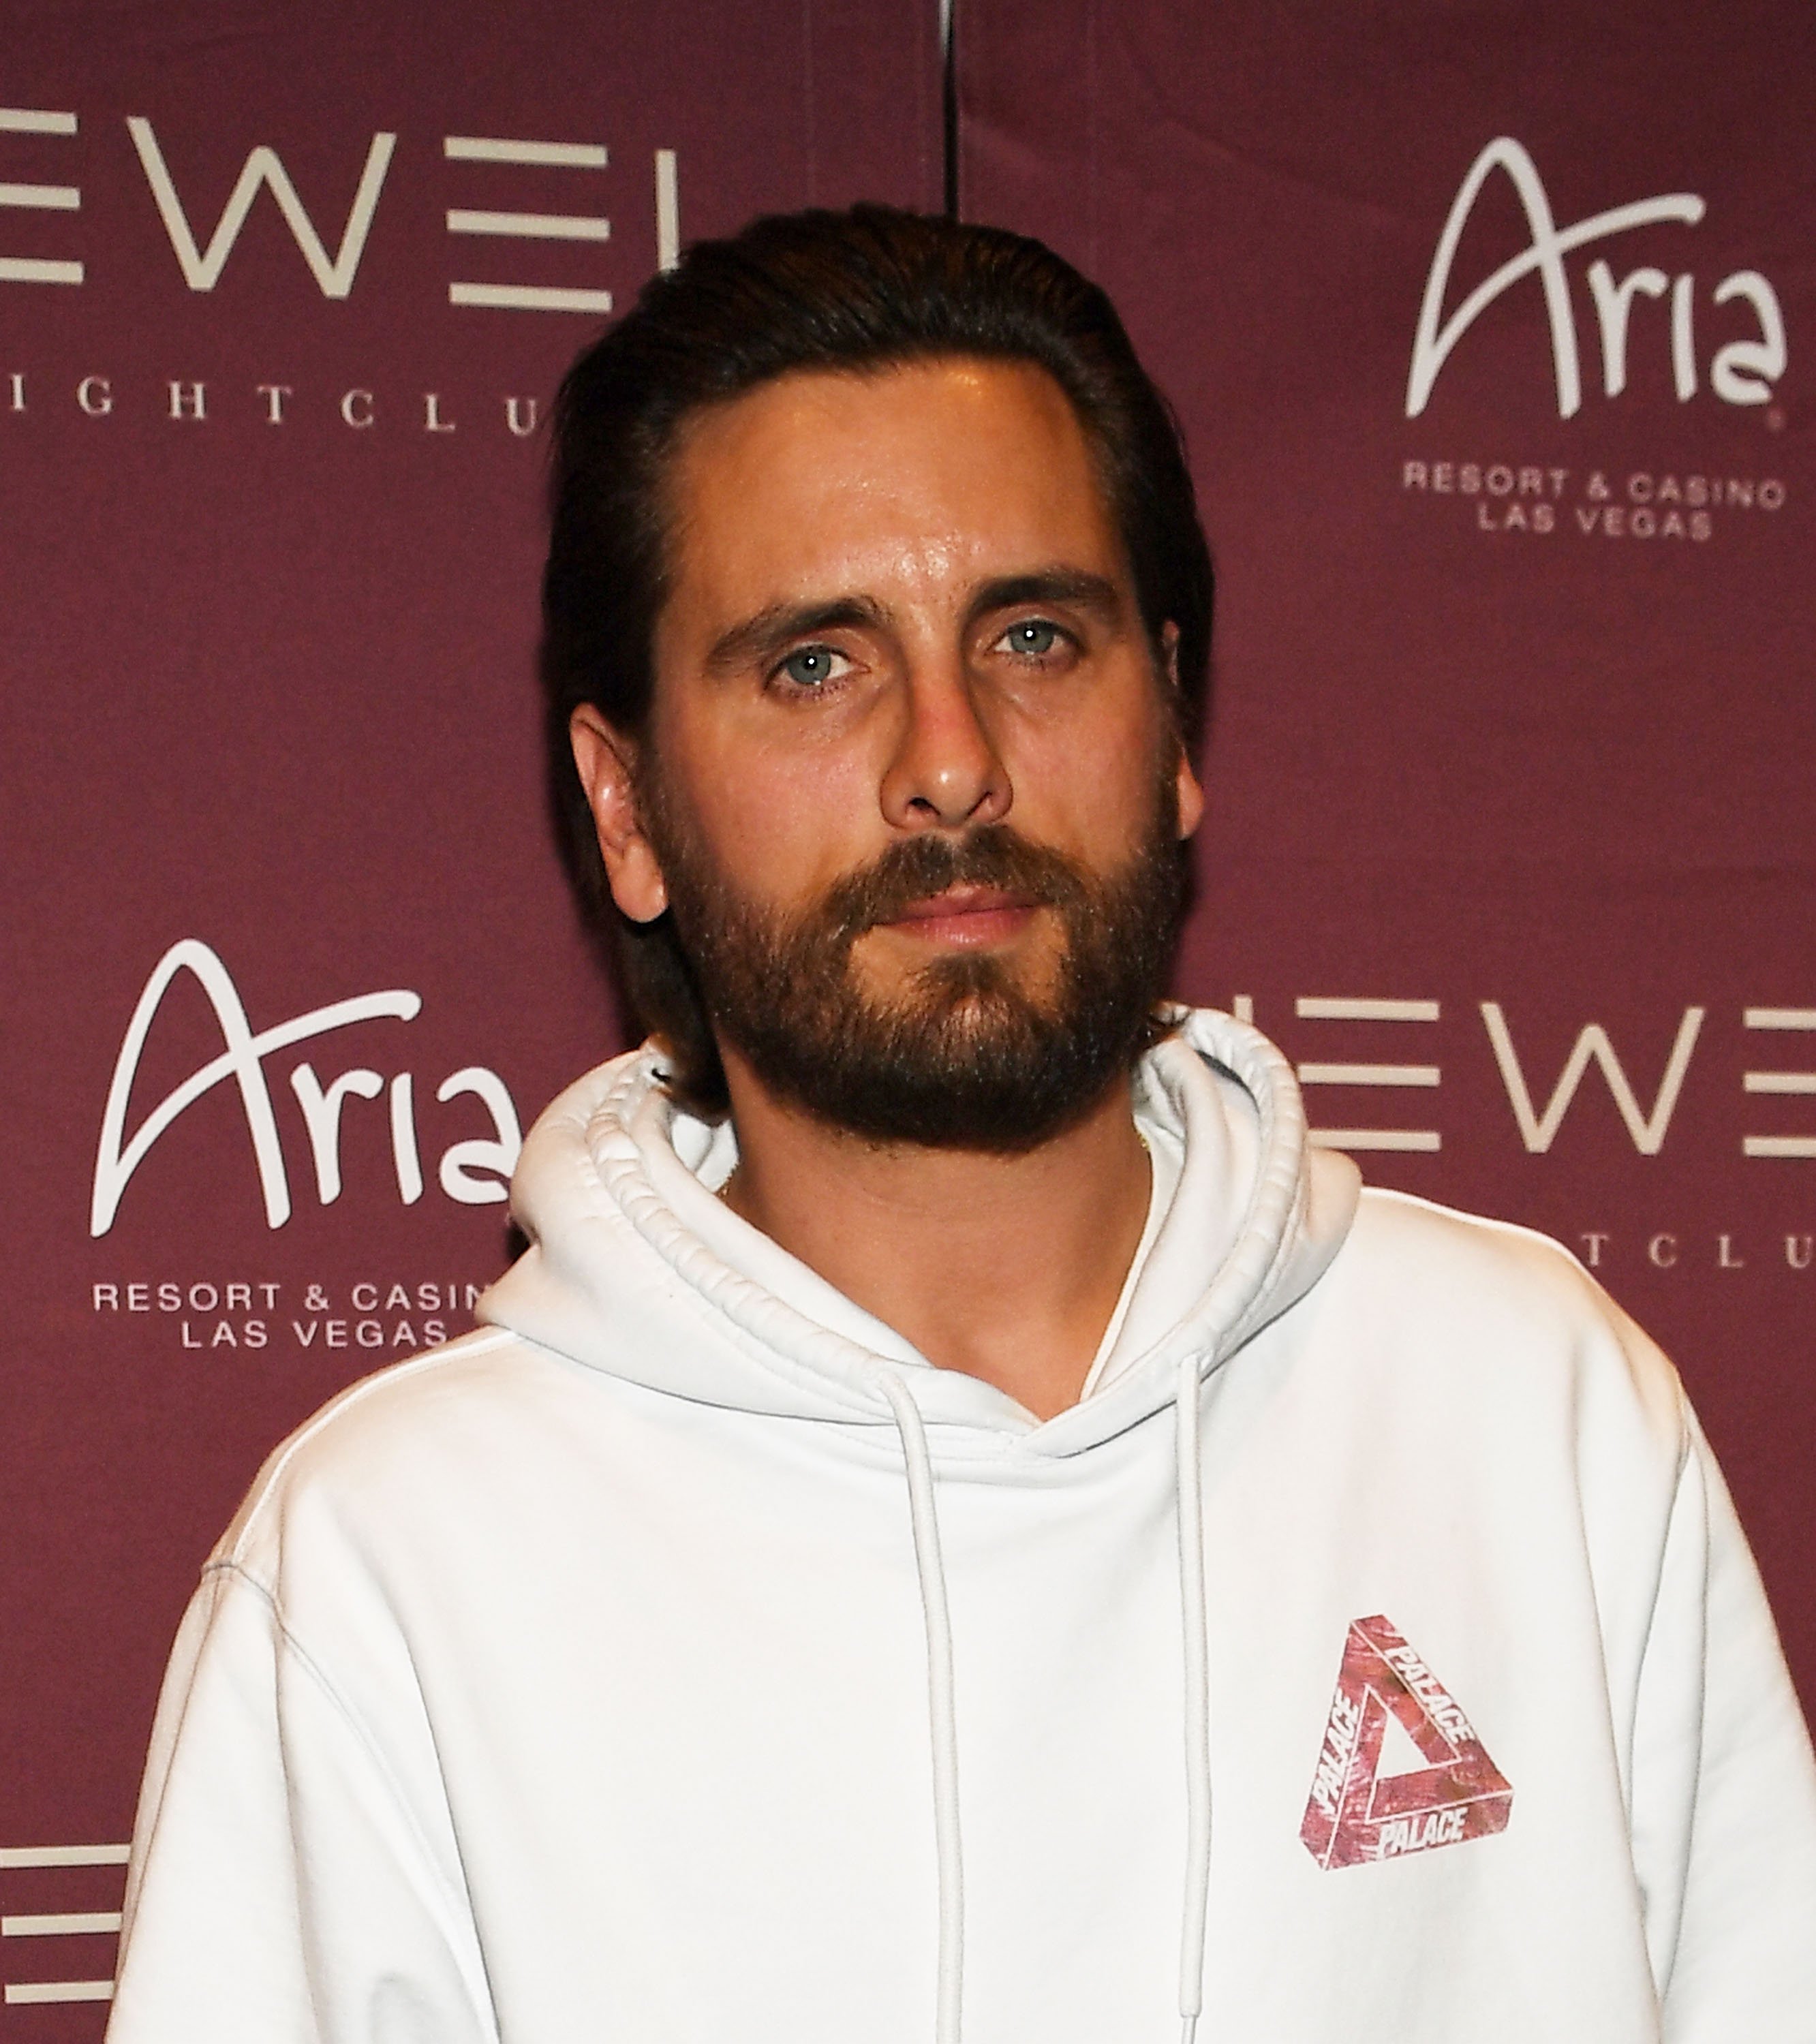 Scott Disick visits the ARIA Resort & Casino in Las Vegas, Nevada on March 23, 2018 | Photo: Getty Images